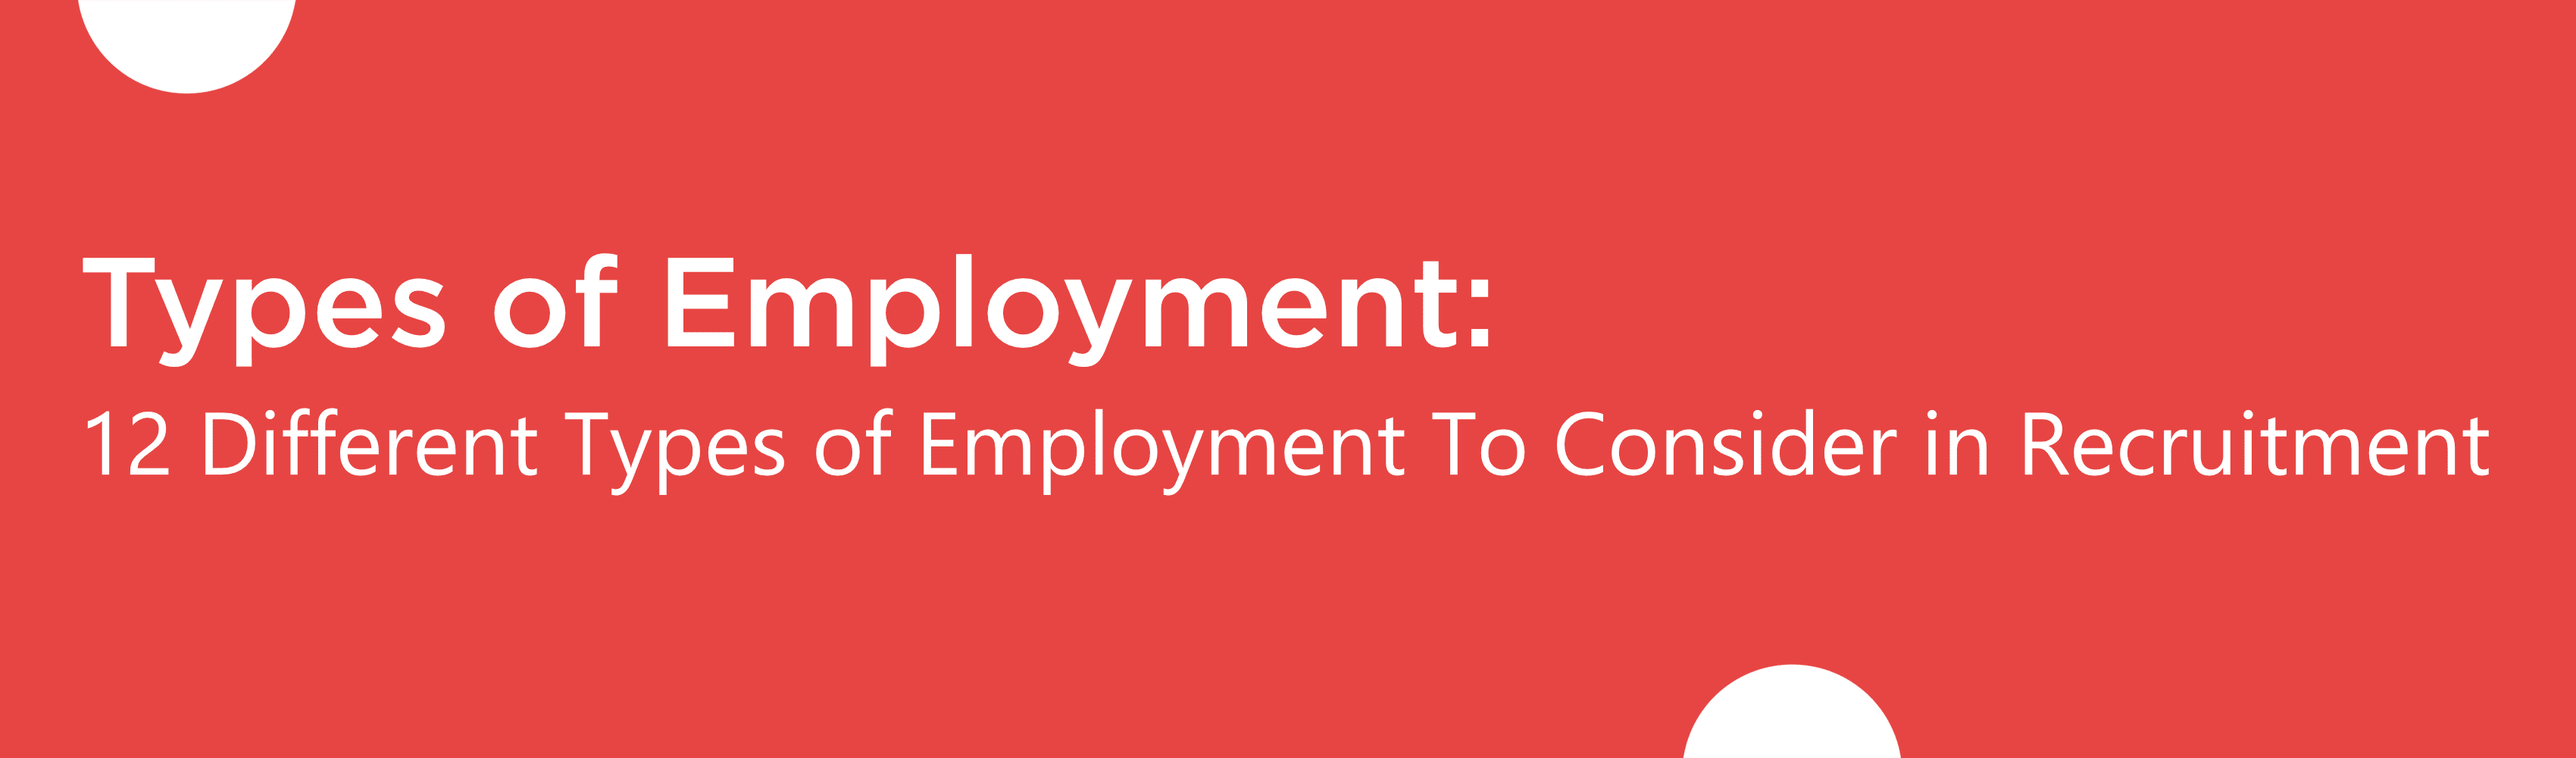 Types of Employment: 12 Different Types of Employment To Consider in Recruitment